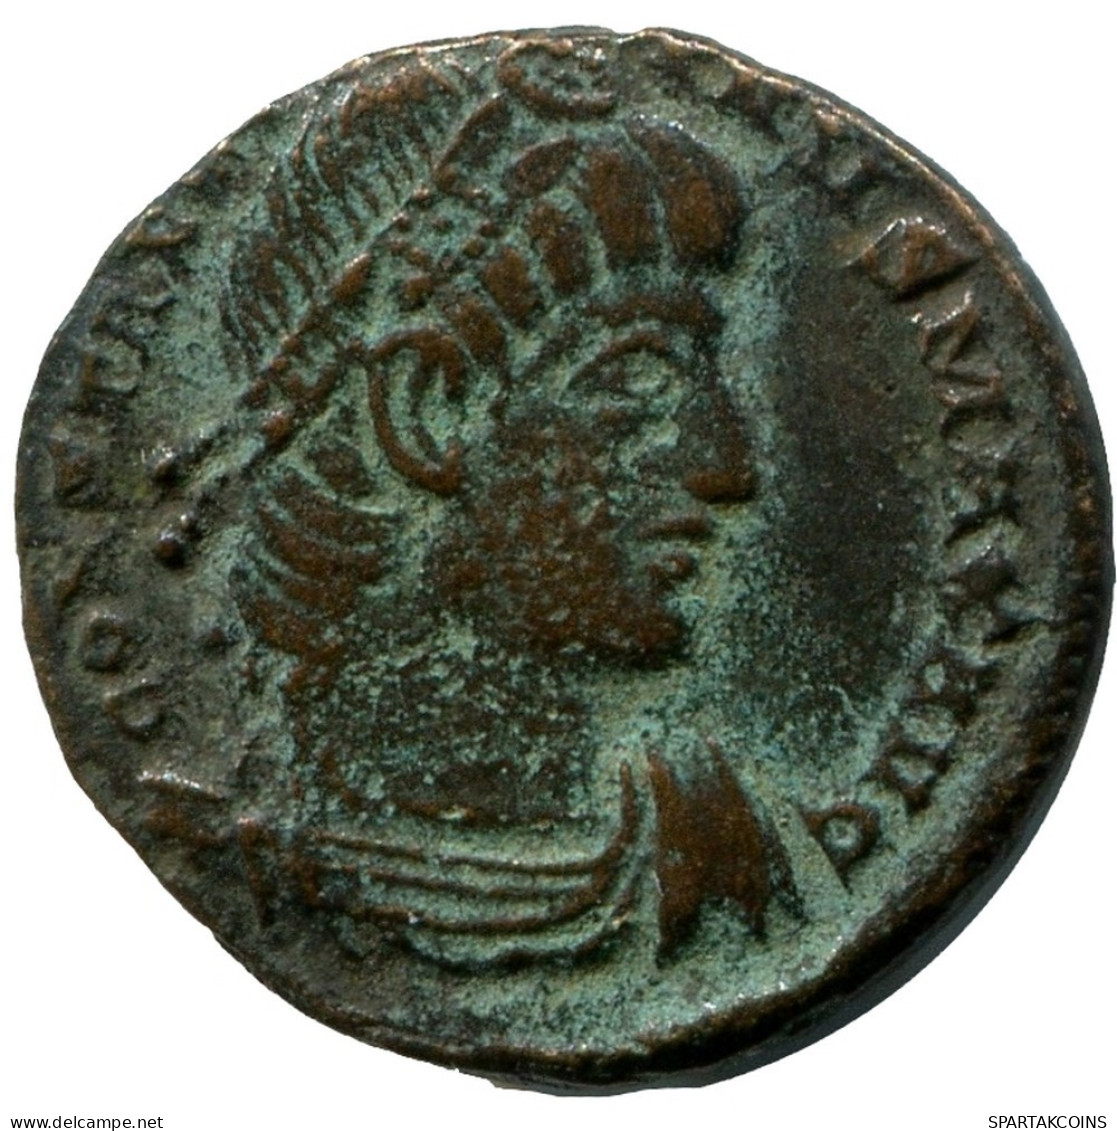 CONSTANTINE I MINTED IN CONSTANTINOPLE FOUND IN IHNASYAH HOARD #ANC10730.14.D.A - El Impero Christiano (307 / 363)